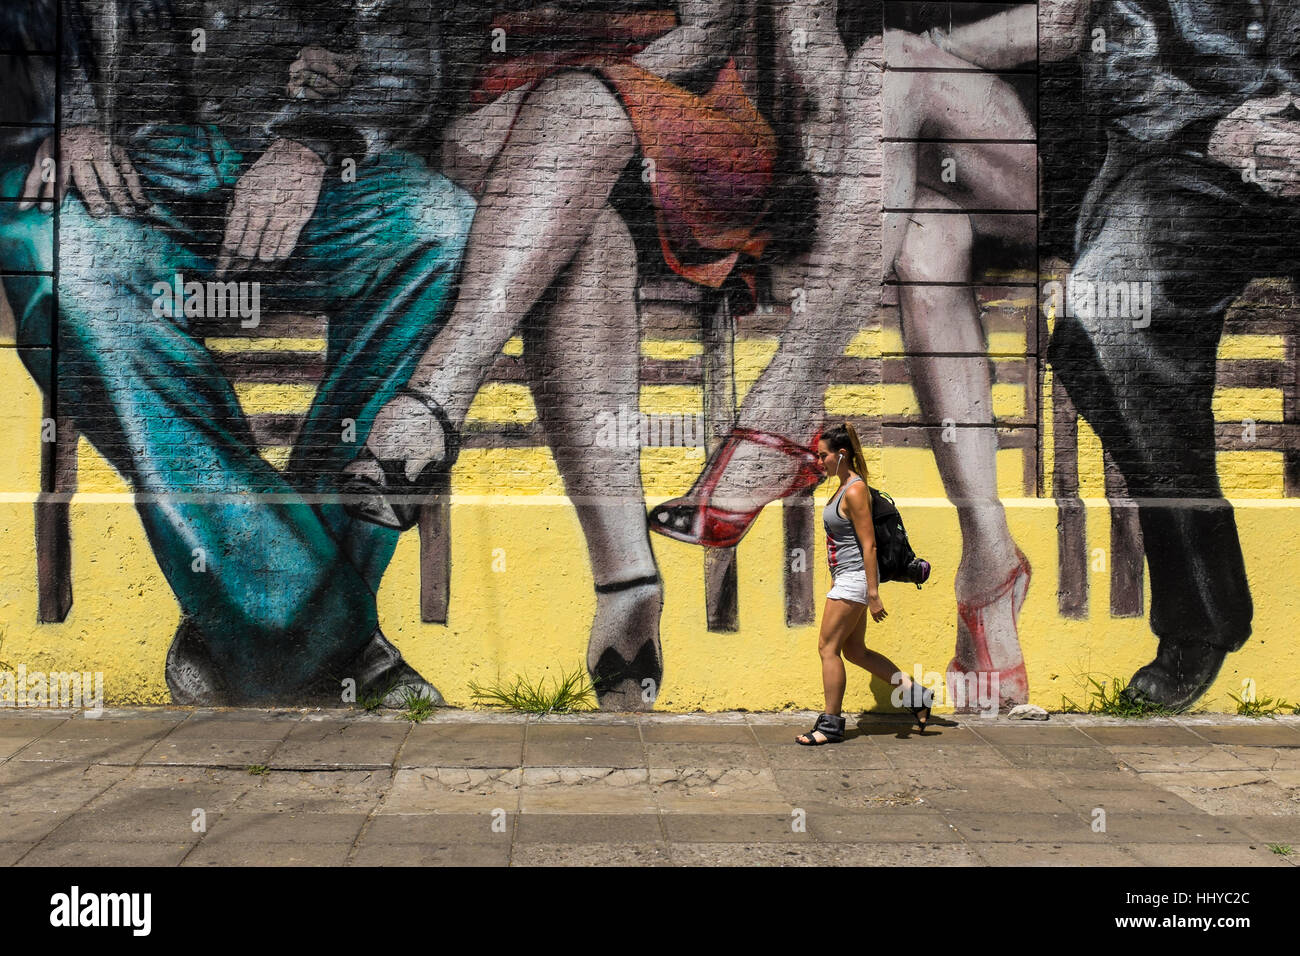 A woman walks past a city mural depicting sitting couples, Buenos Aires city, Argentina. Stock Photo